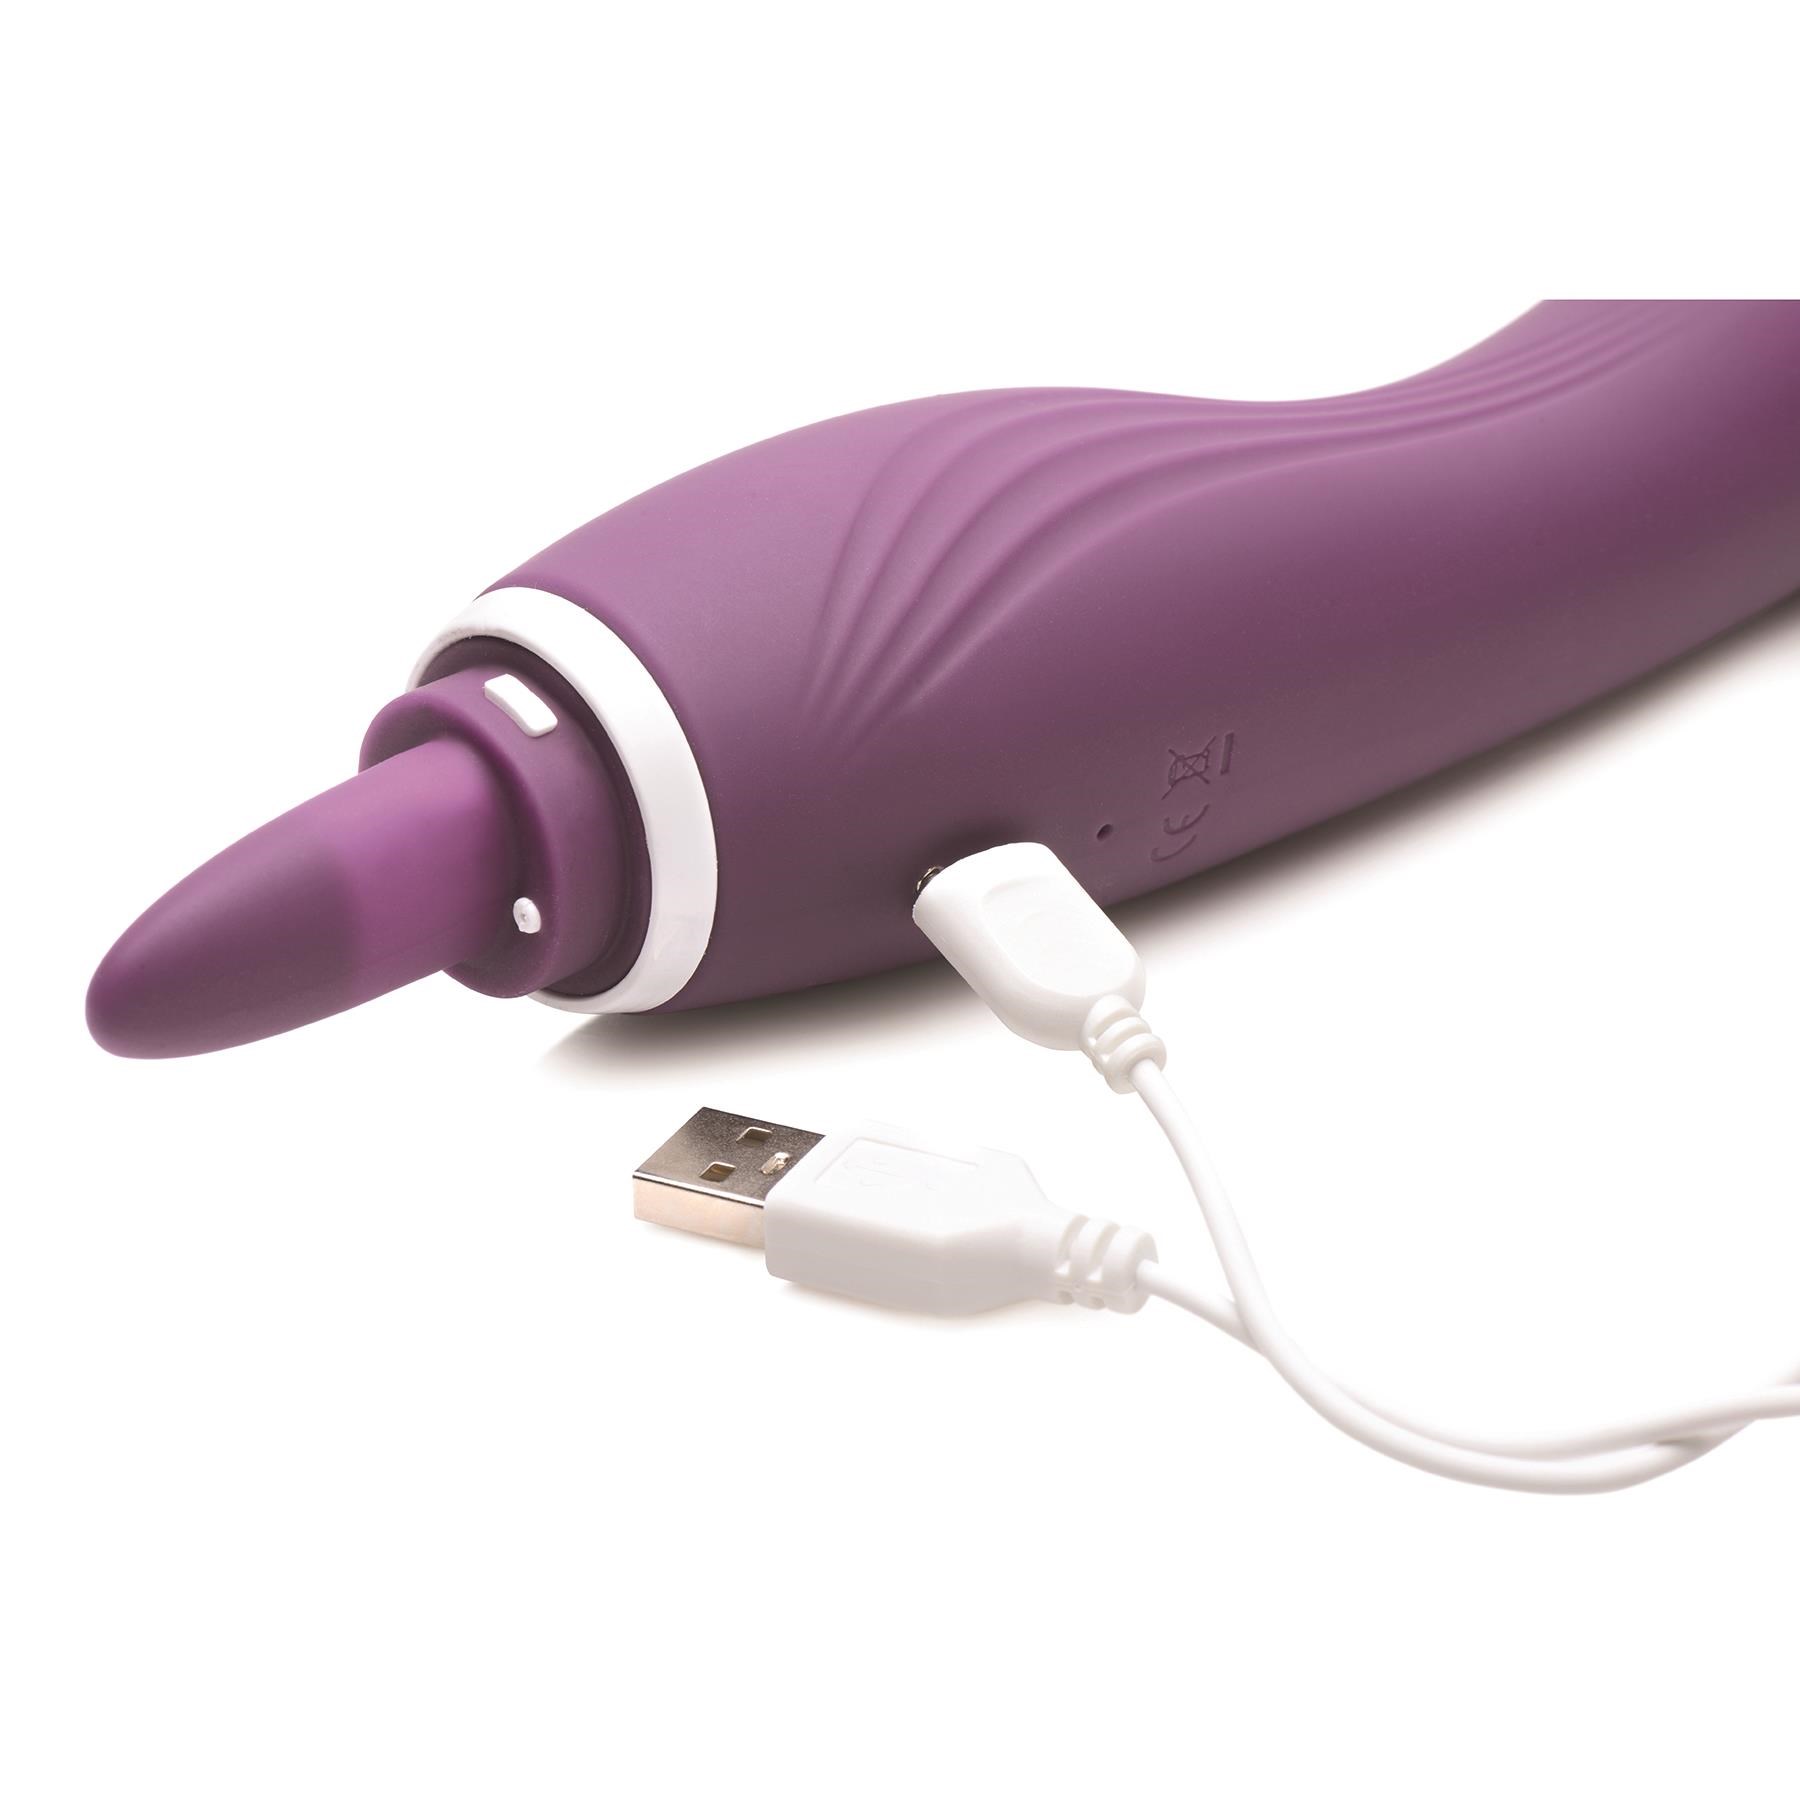 Shegasm Lickgasm Vibrating Pussy Pump - Showing Where Charger is Placed